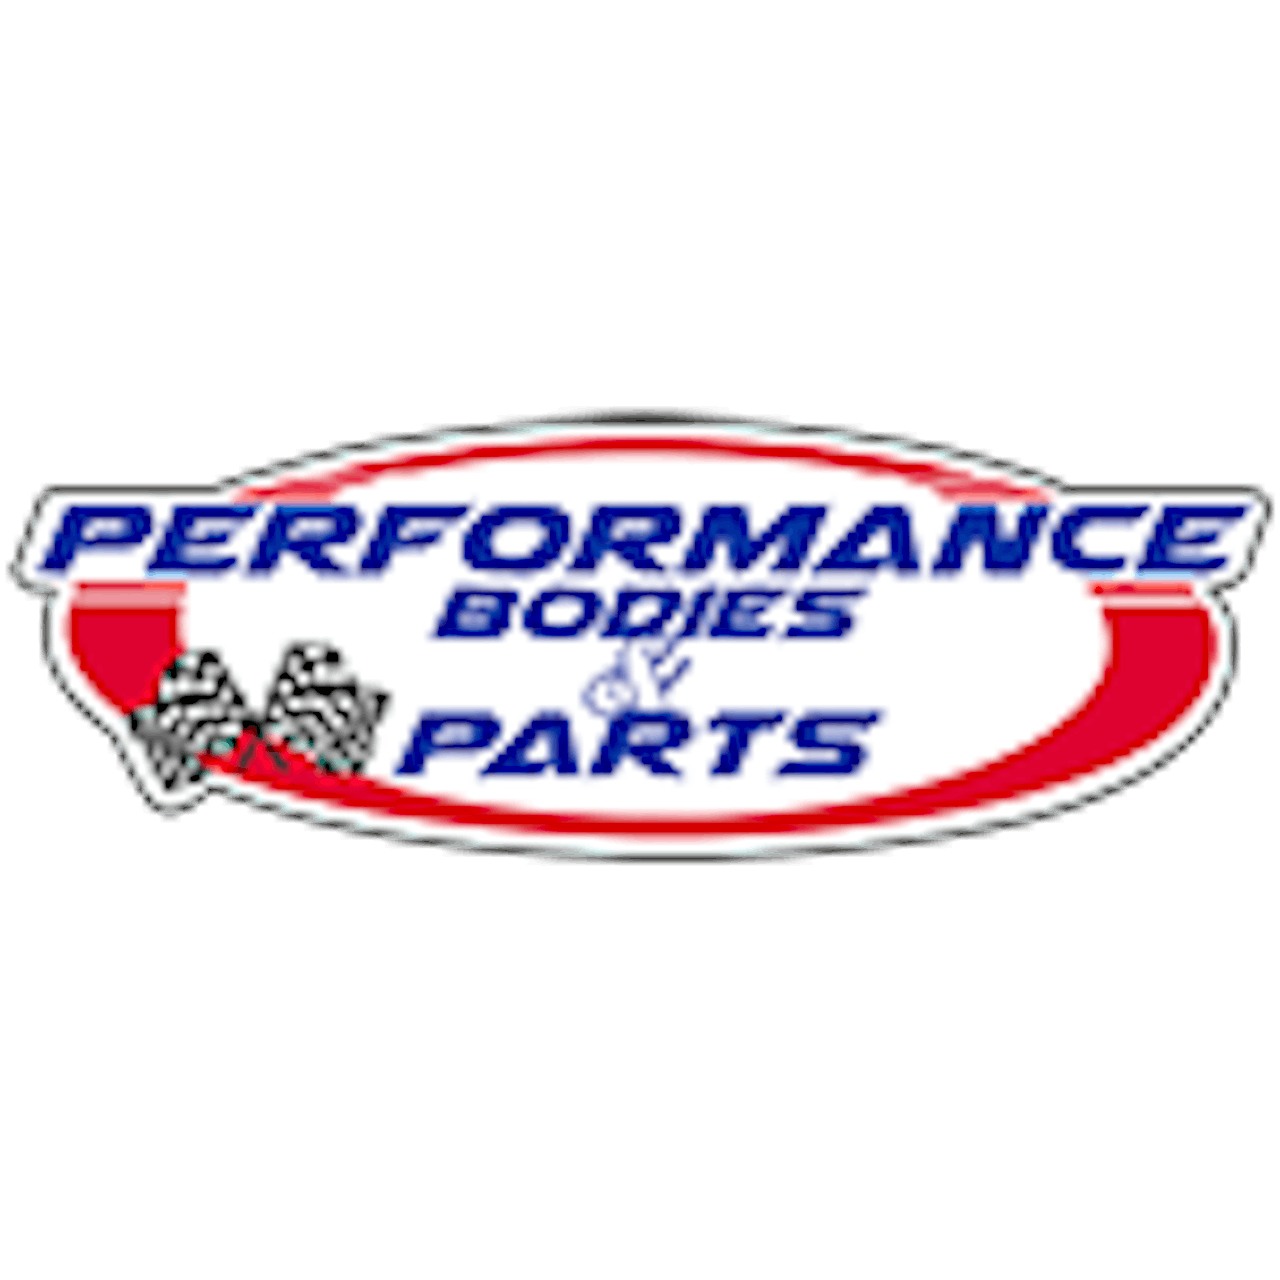 Performance bodies and parts logo